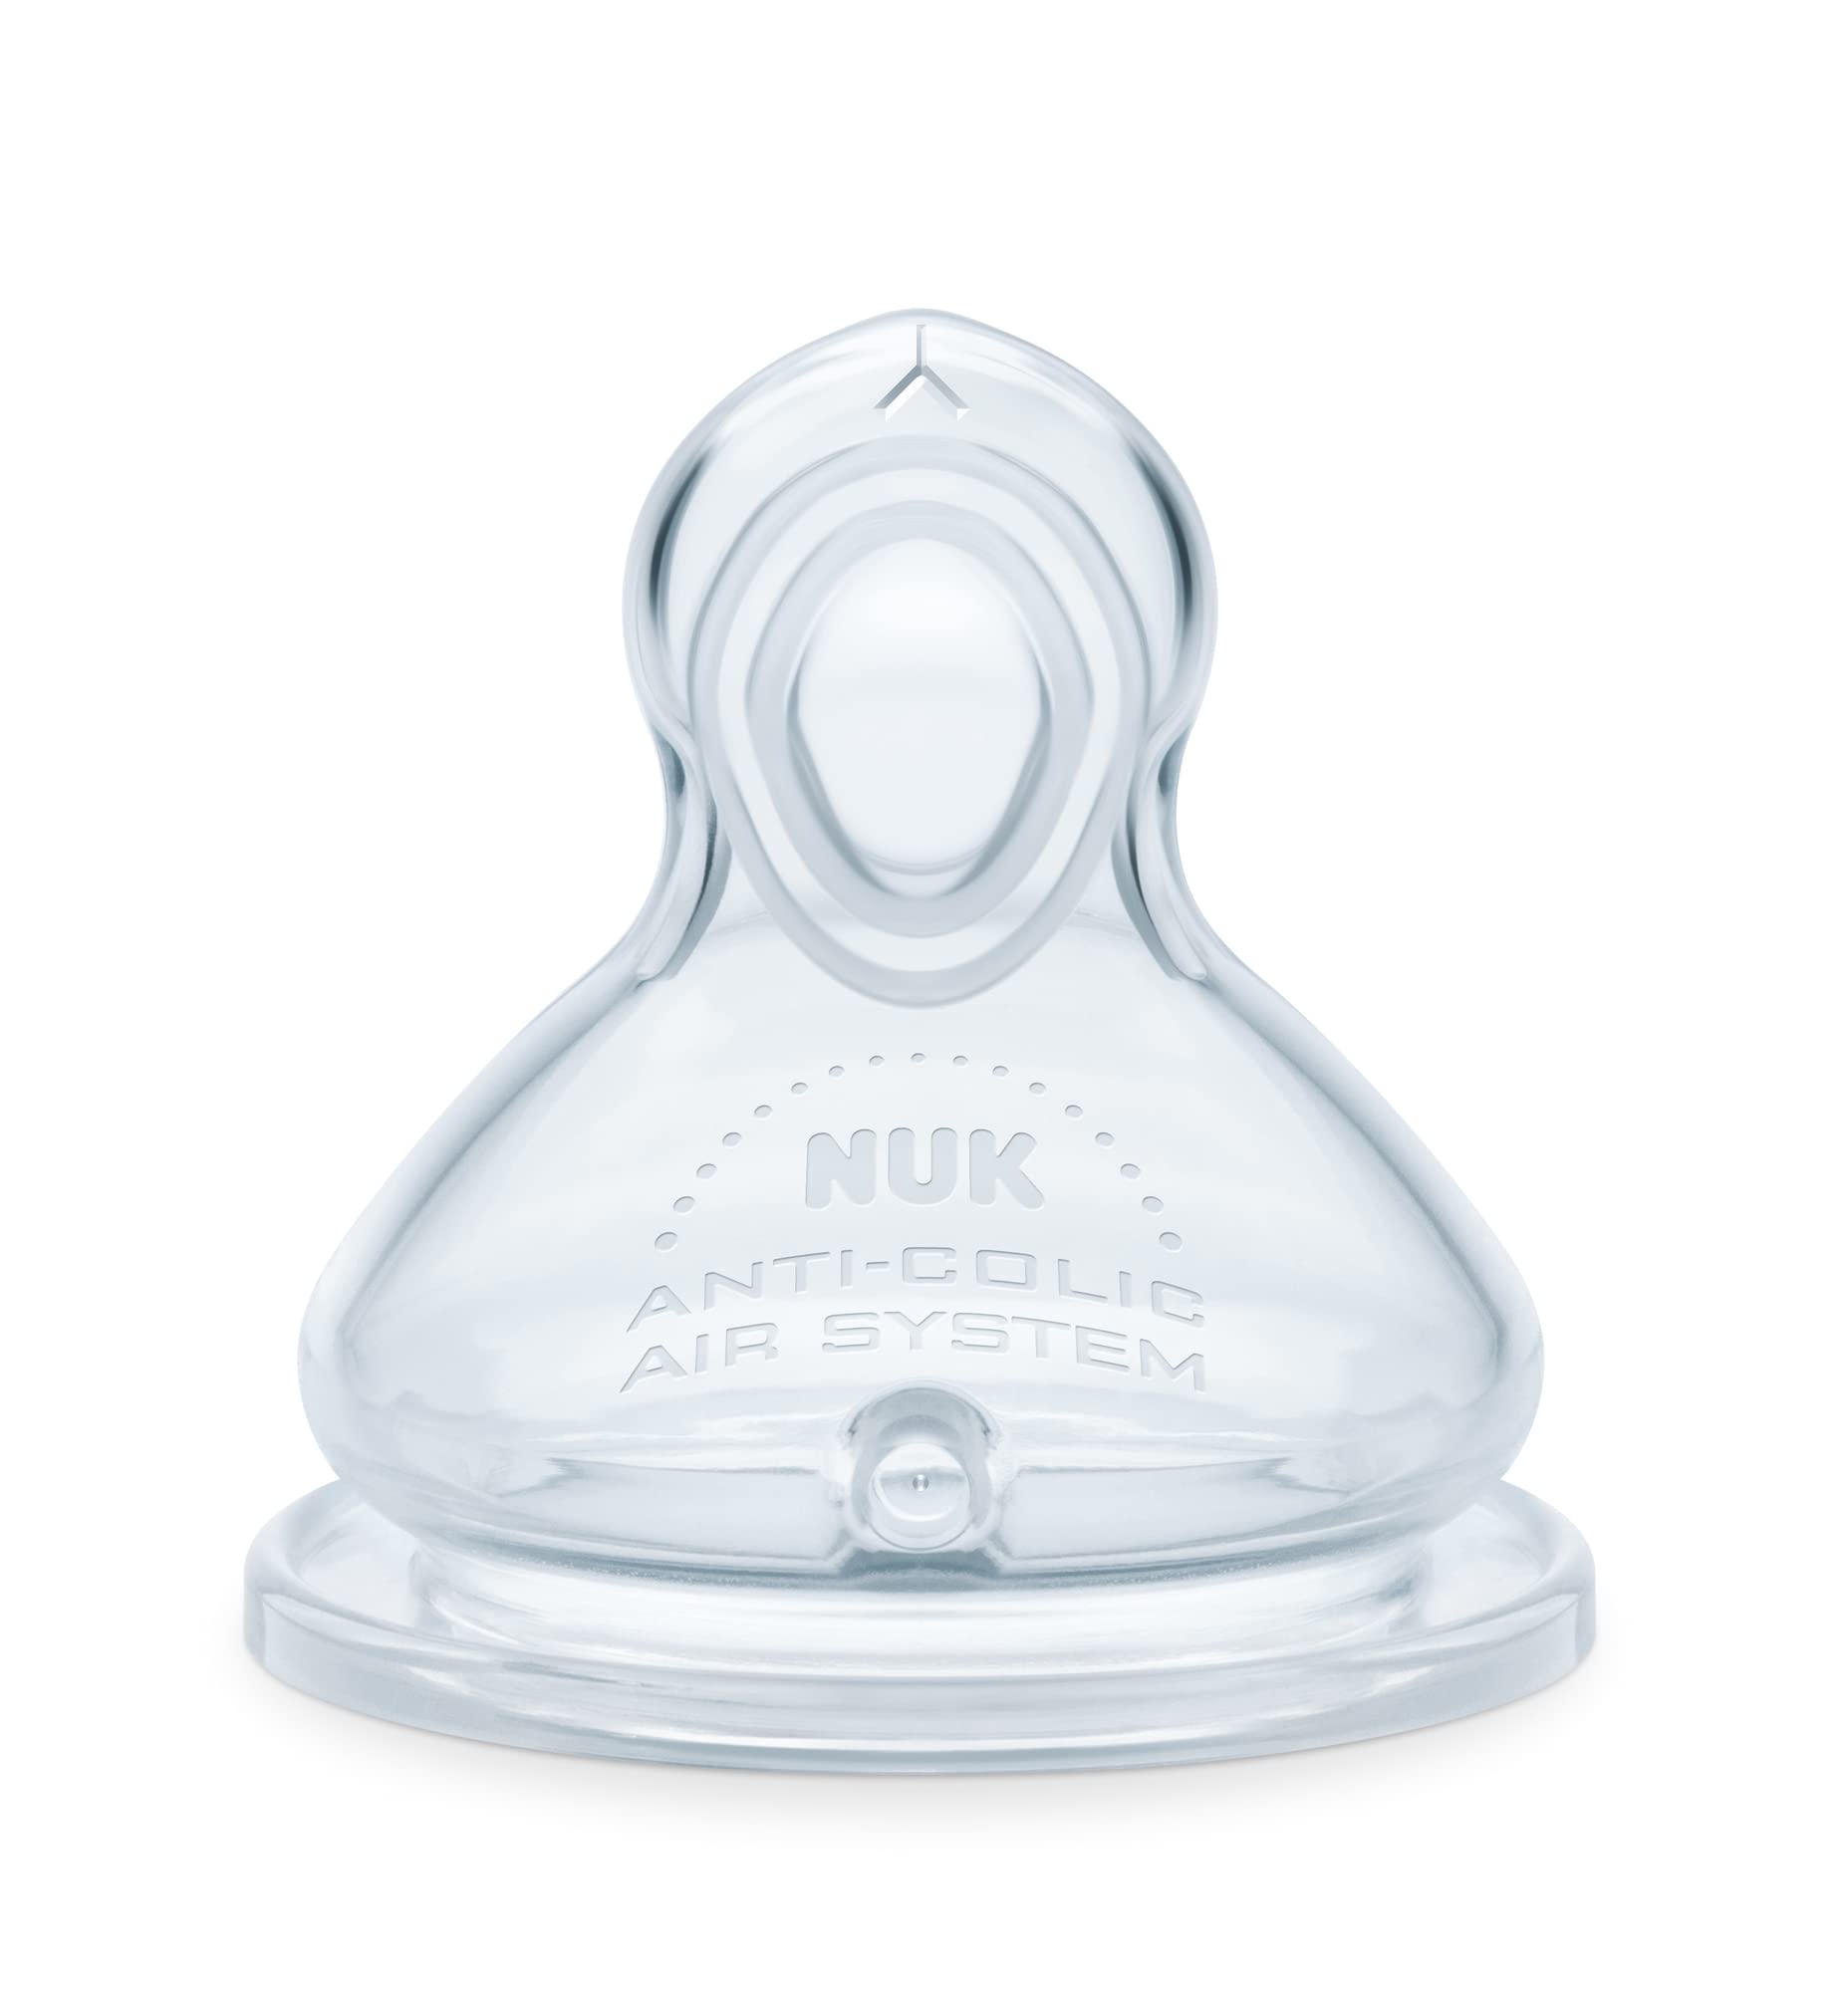 NUK Smooth Flow Anti Colic Baby Bottle, 10 oz, 4 Pack, Elephant,4 Count (Pack of 1)